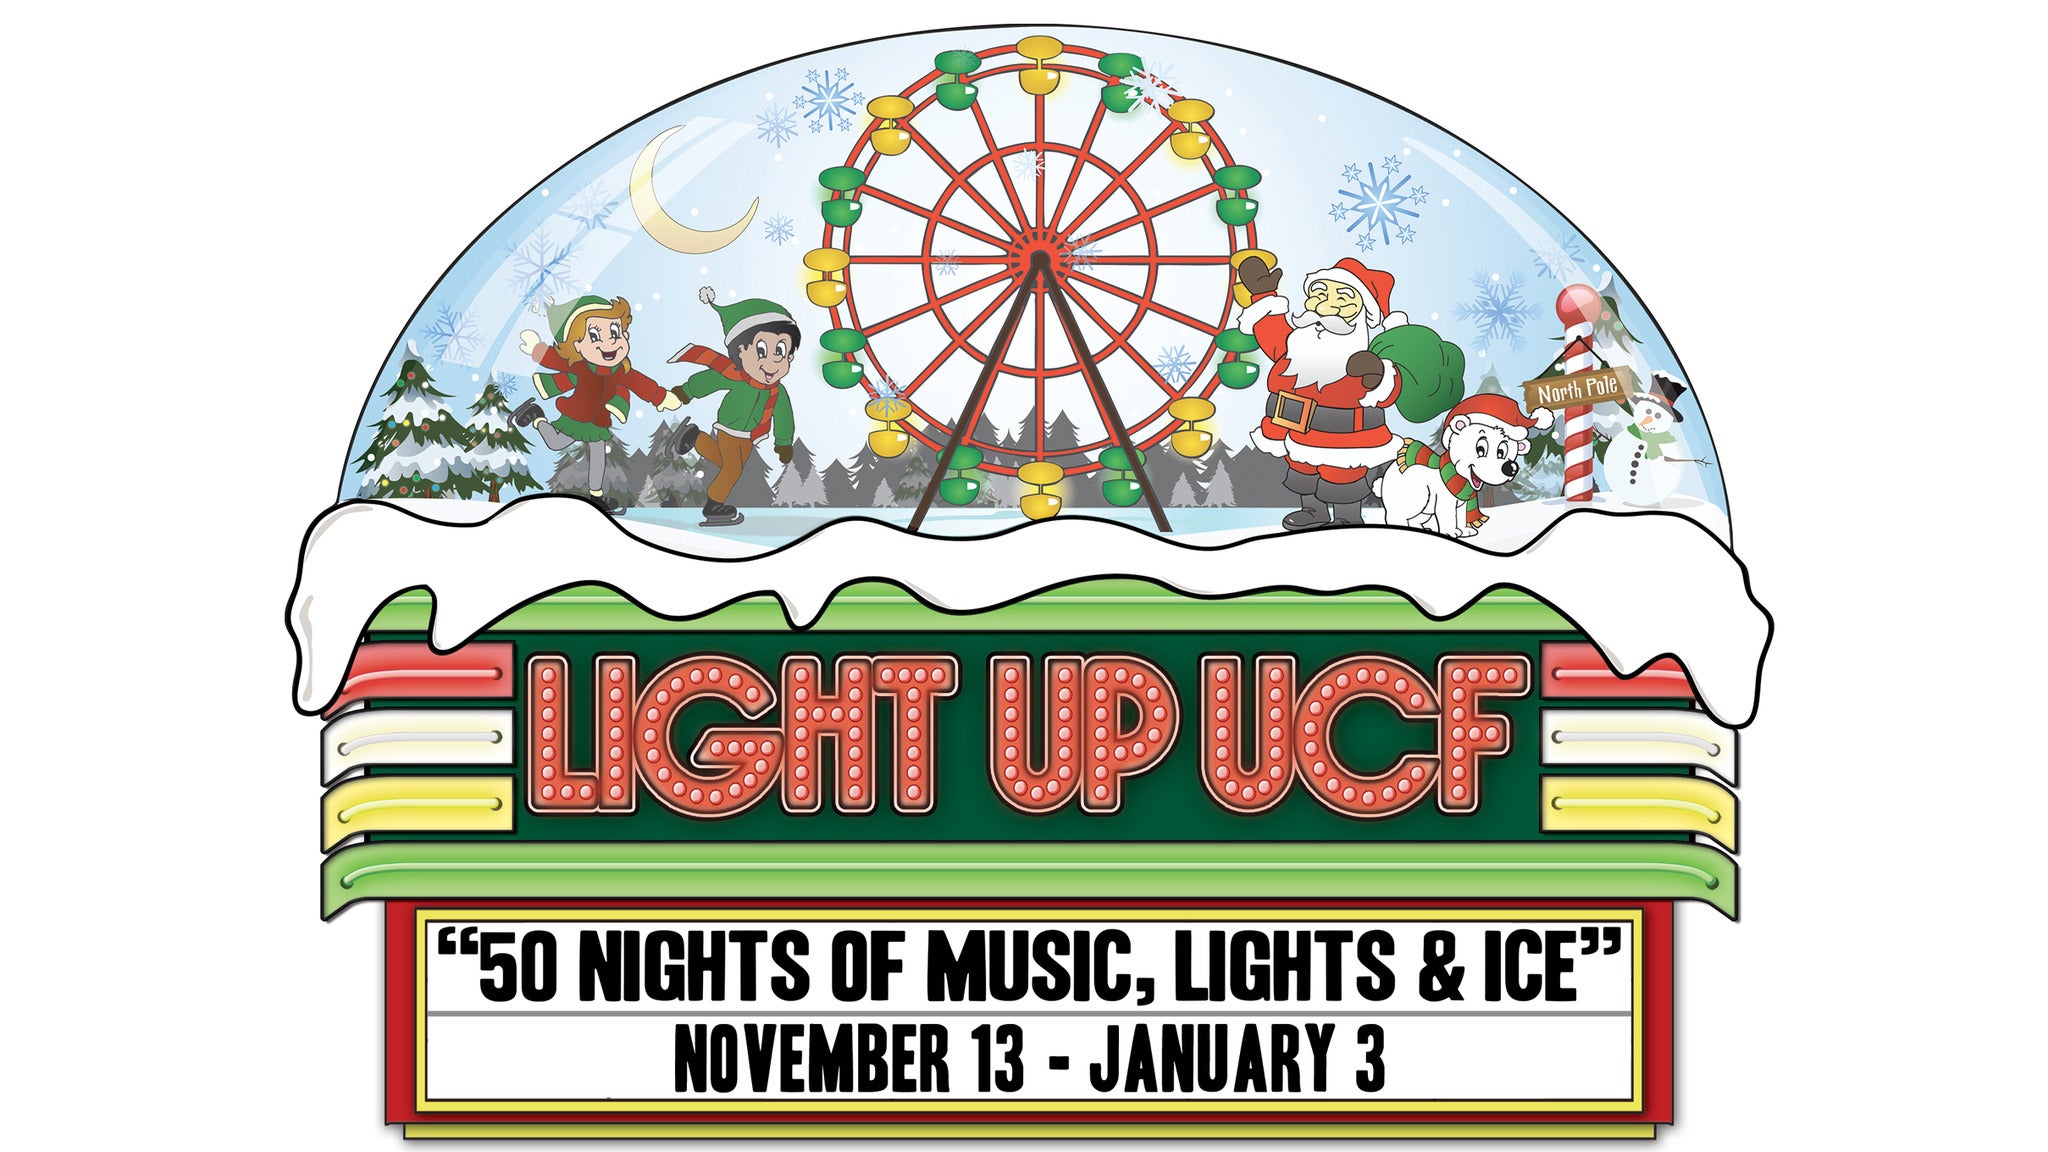 Light Up UCF Tickets Event Dates & Schedule